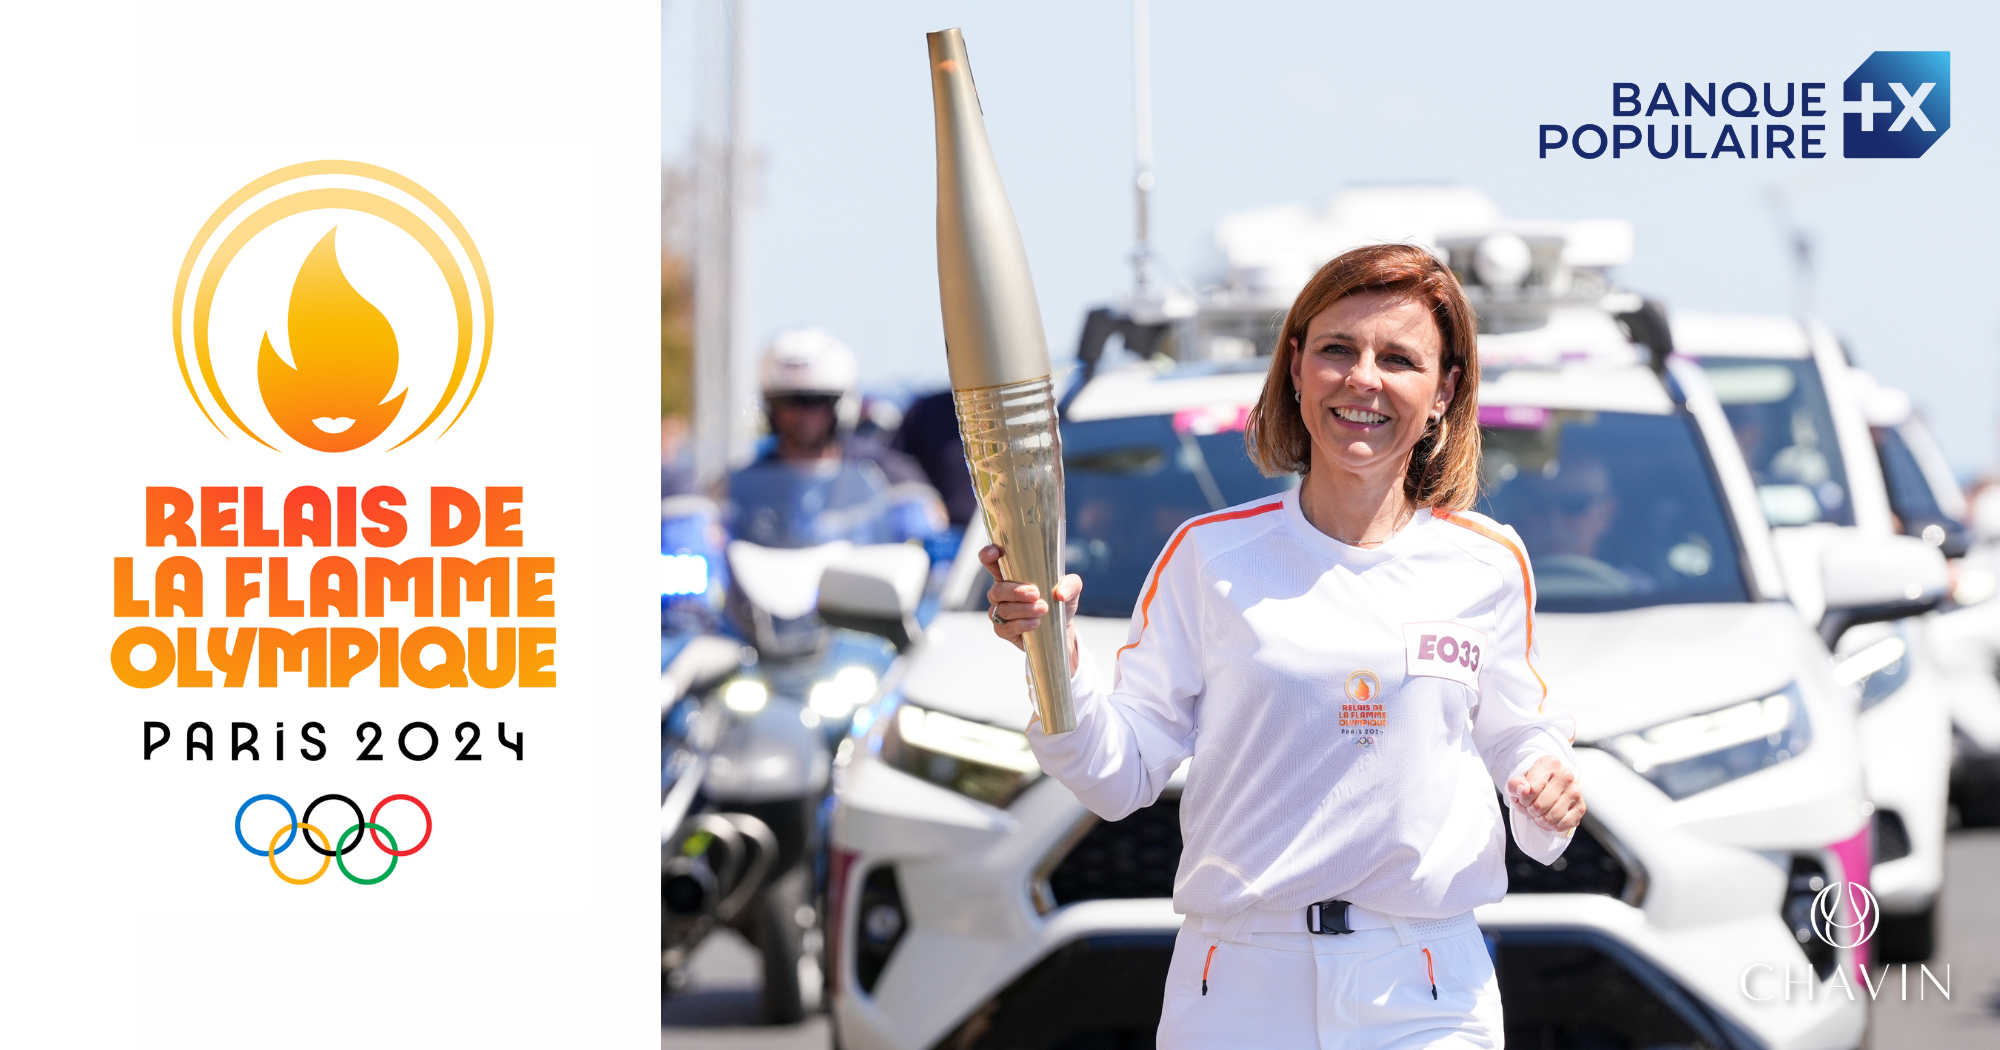 Chavin - A Flame Bearing Hope: Mathilde Boulachin in the Paris 2024 Olympic Flame Relay in Sète